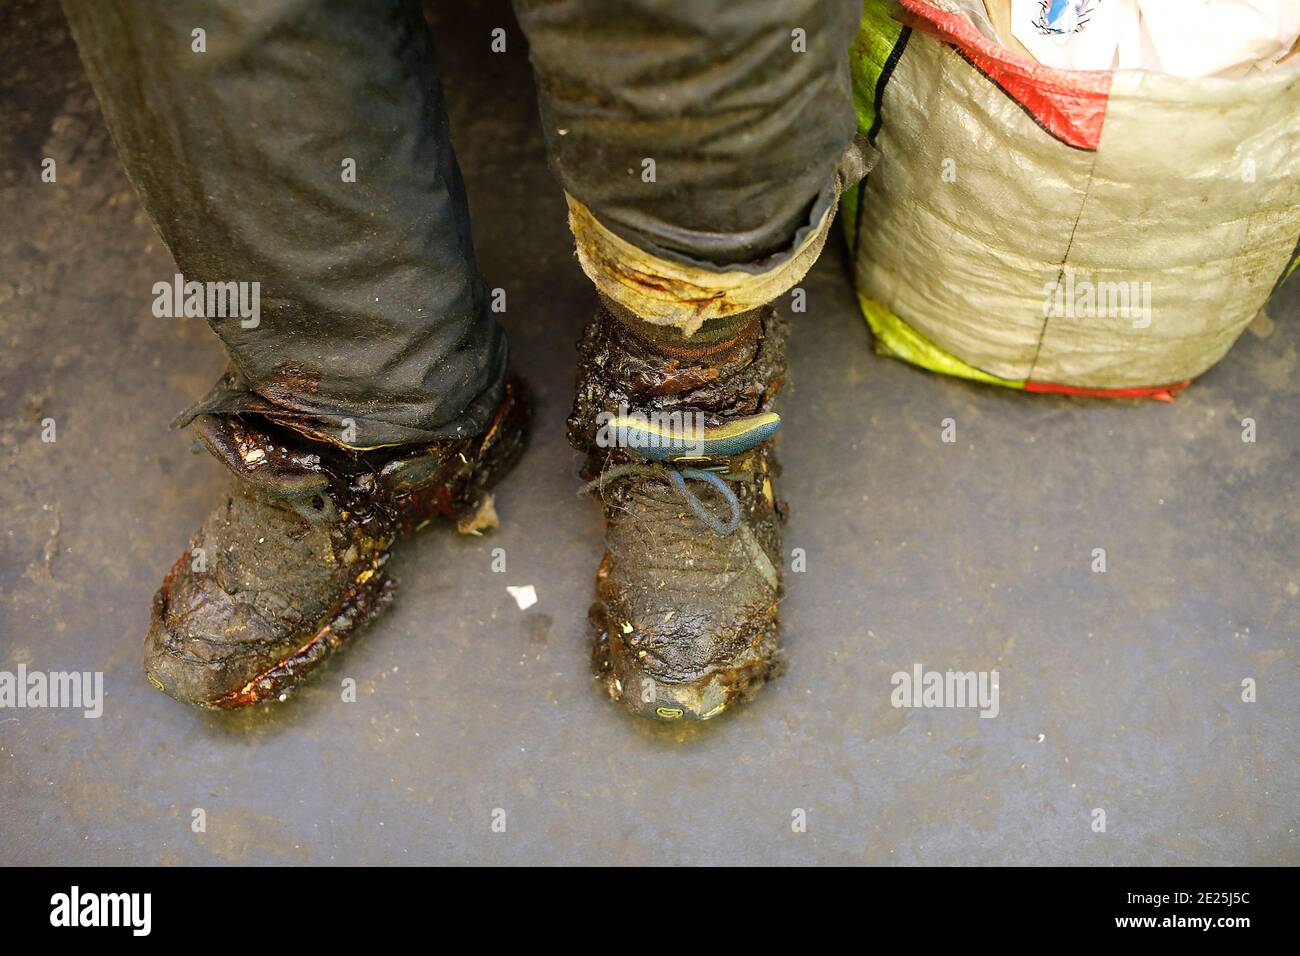 Homeless man's shoes in Paris, France Stock Photo